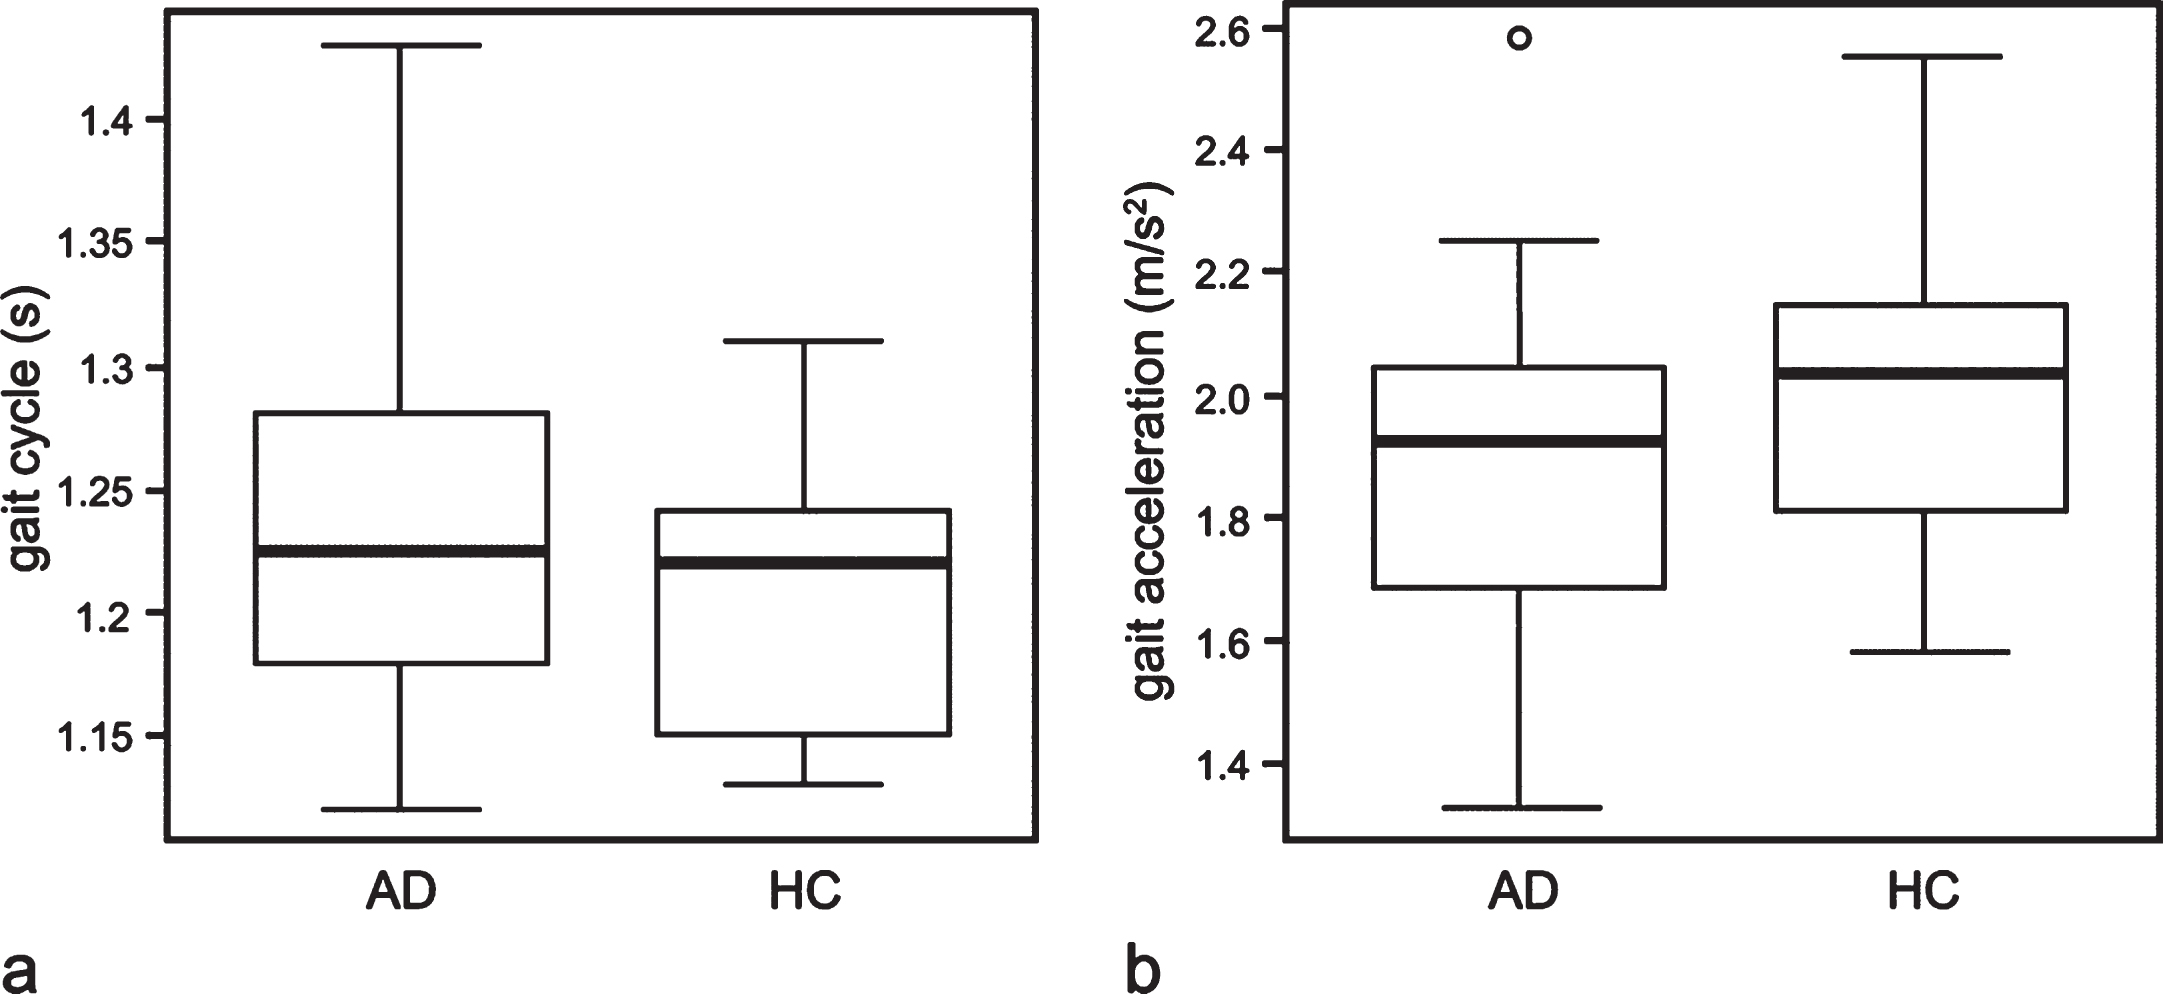 Boxplots illustrating the comparison of gait cycle (a) and gait acceleration (b) among patients with Alzheimer disease (AD) and healthy controls (HC). The horizontal line inside the box indicates the median, and the length of the box is the interquartile range (IQR). The extremes of the whiskers contain the data within 1.5 IQR from the upper or lower quartile. The open circles indicate an outlier.